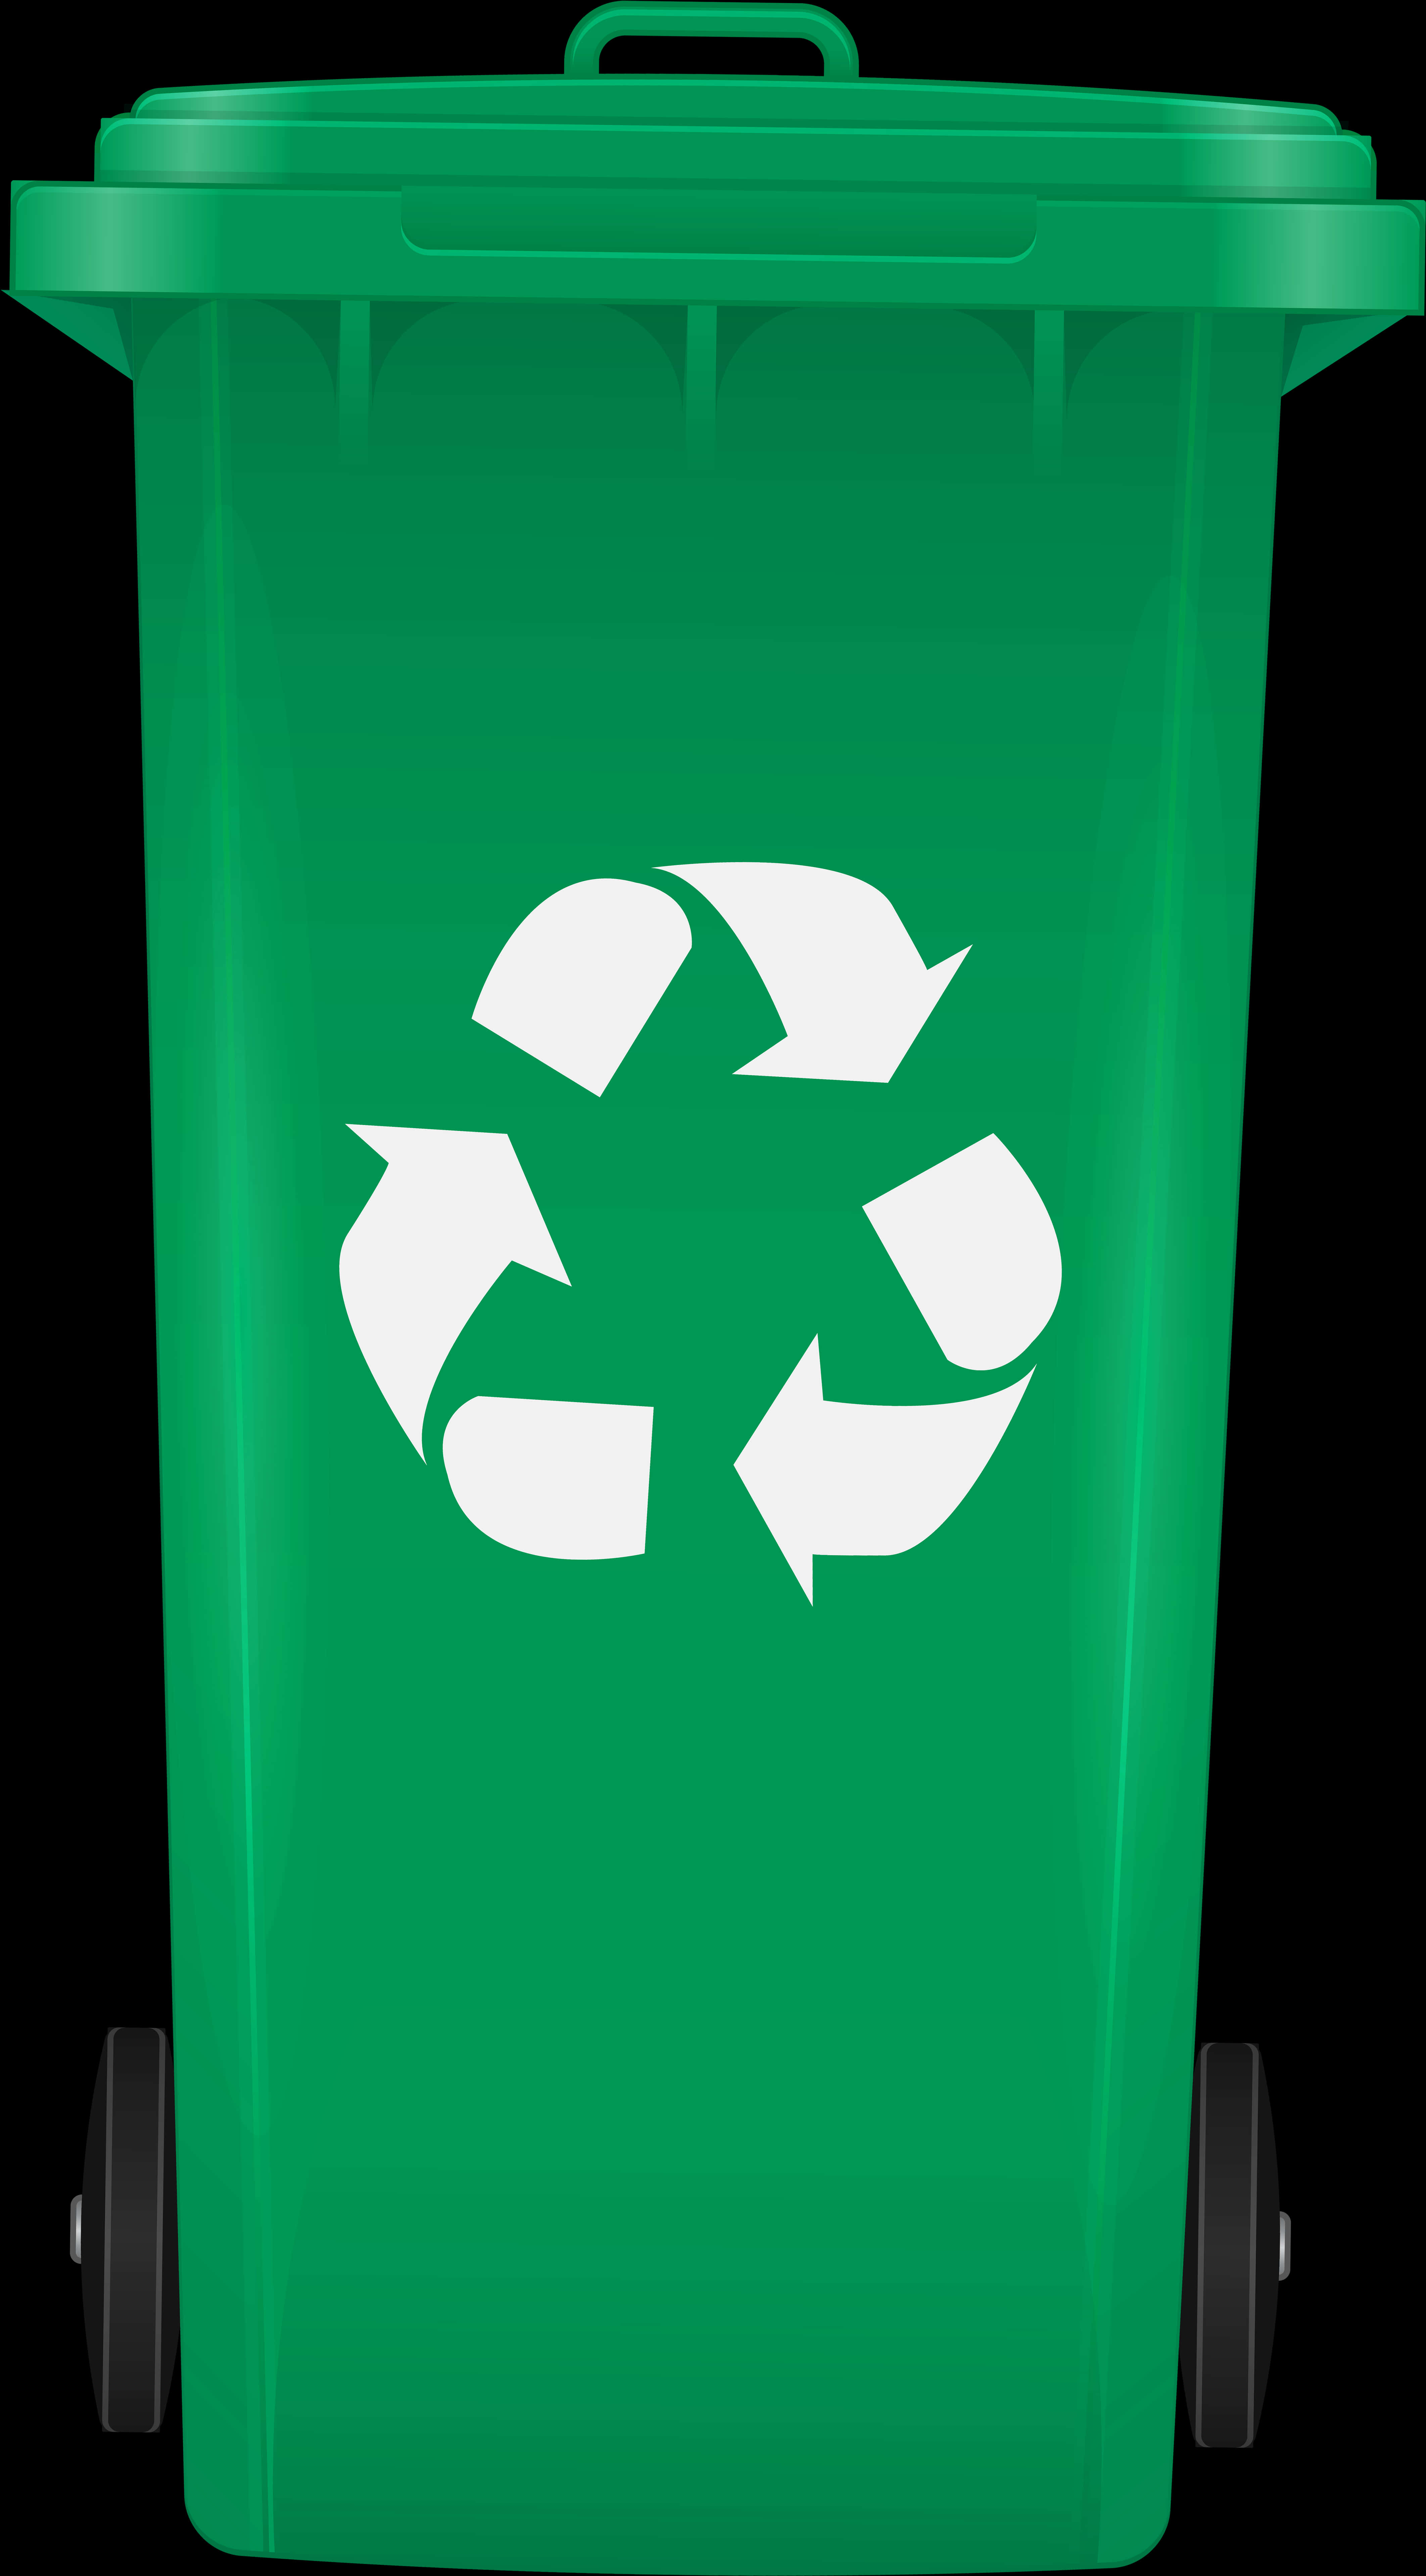 A Green Recycle Bin With White Arrows